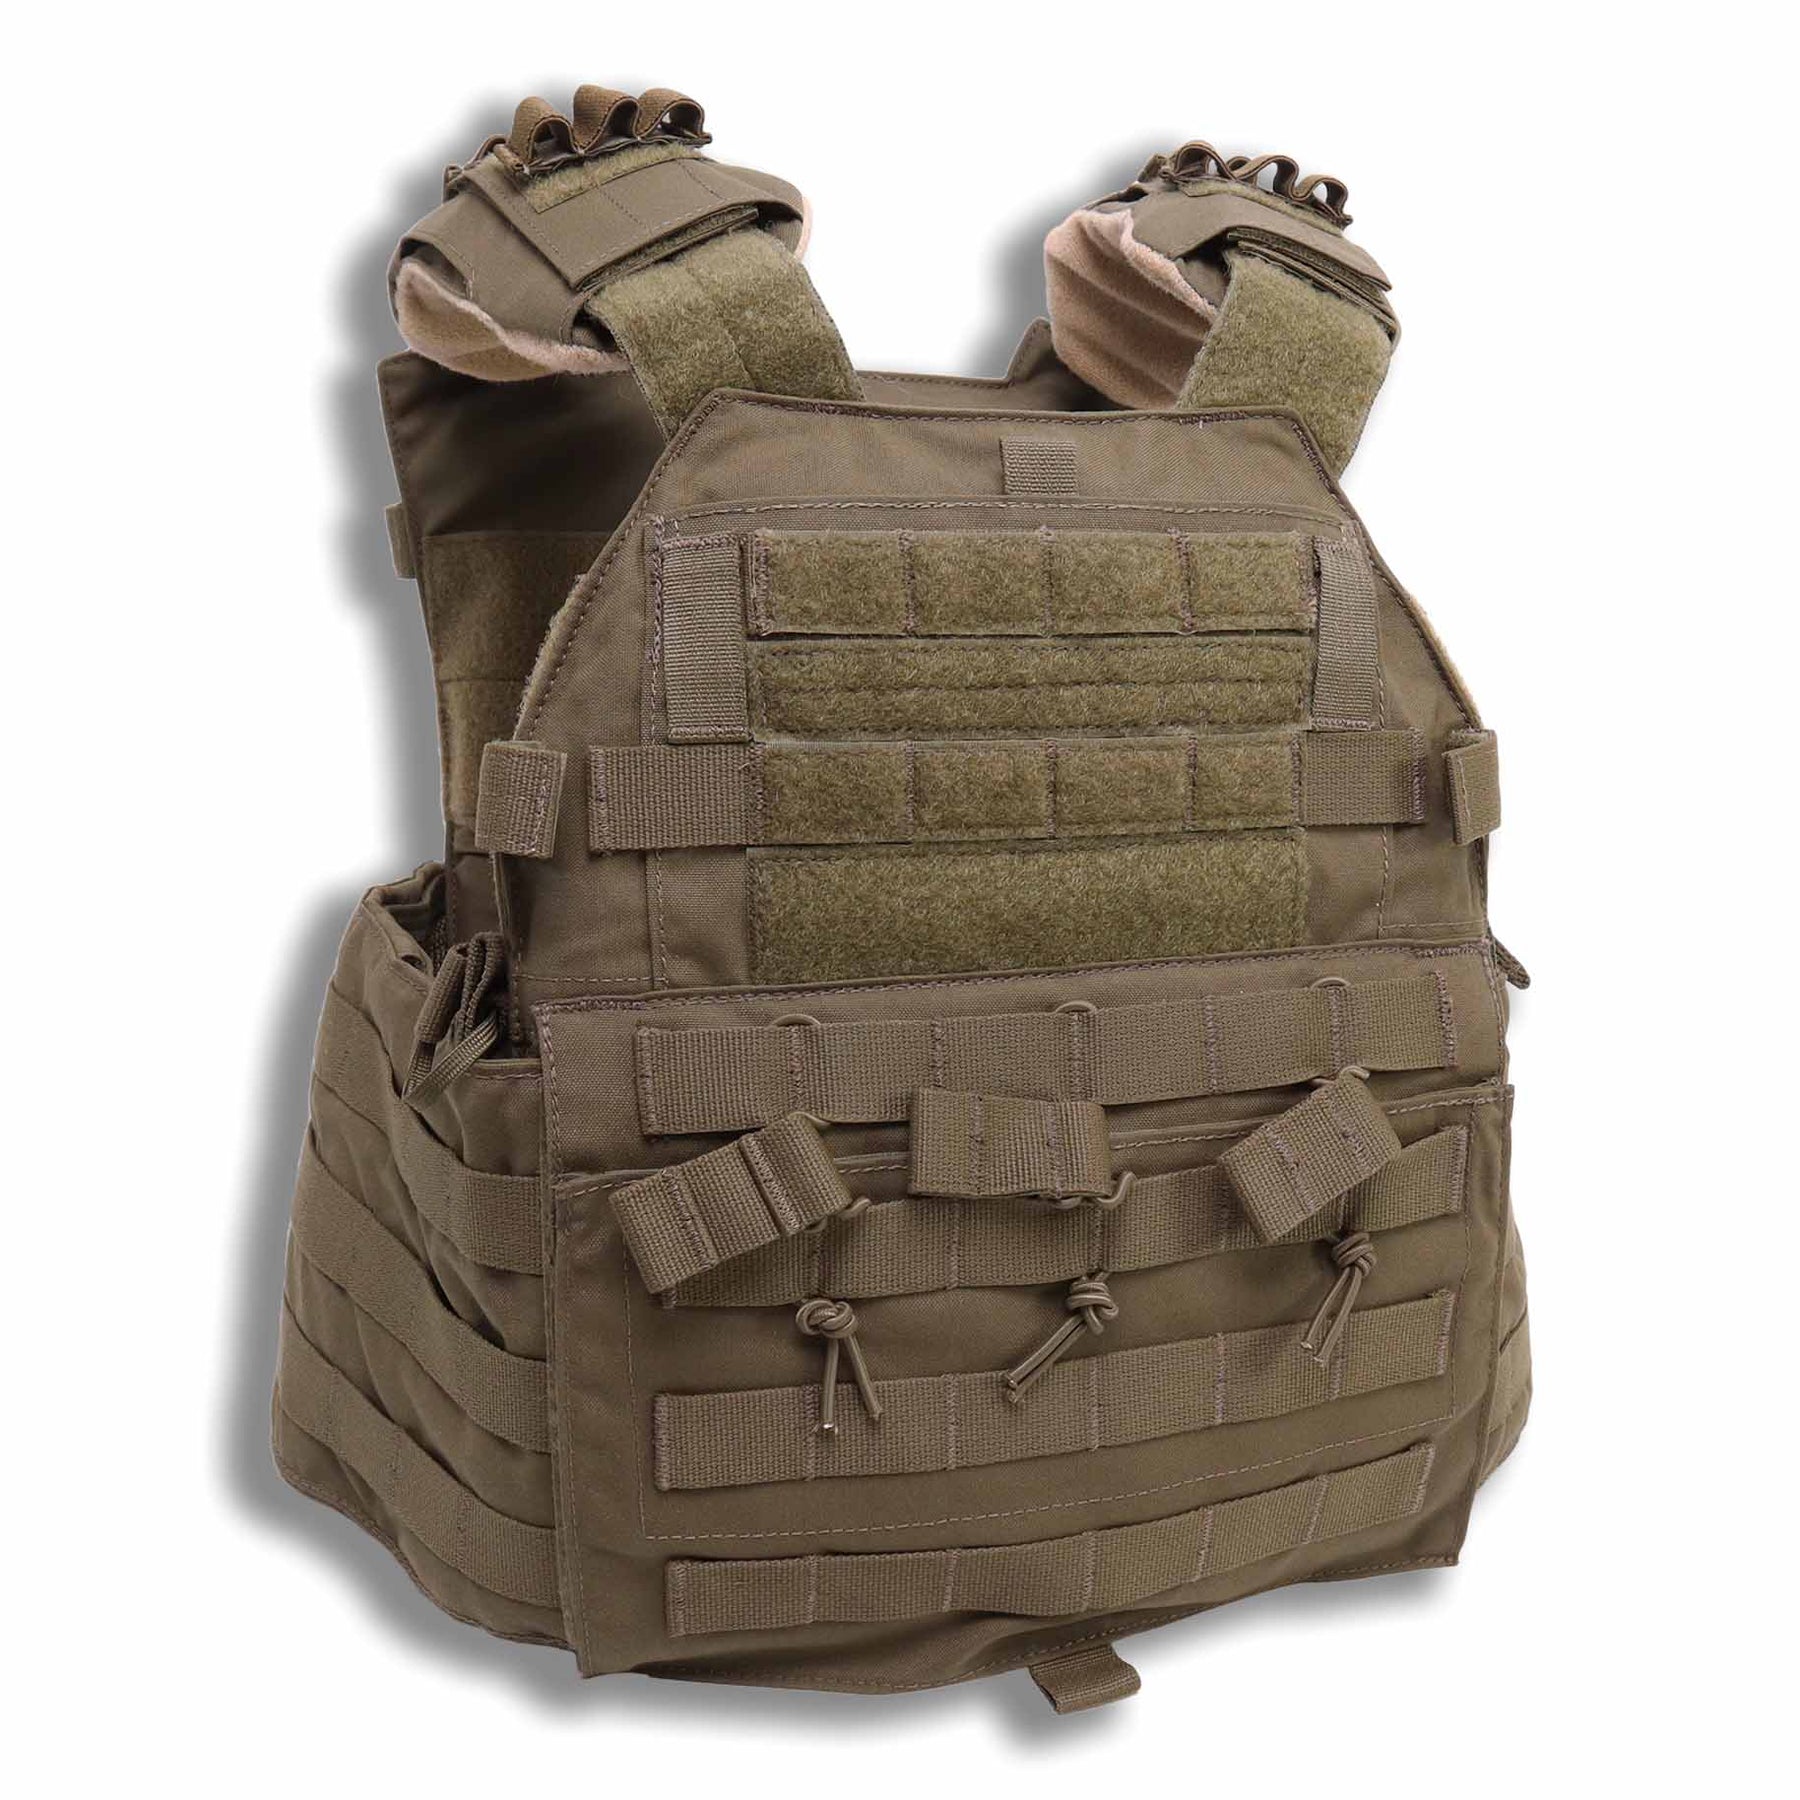 Eagle Industries Multi-Mission Armor Carrier MMAC Plate Carrier